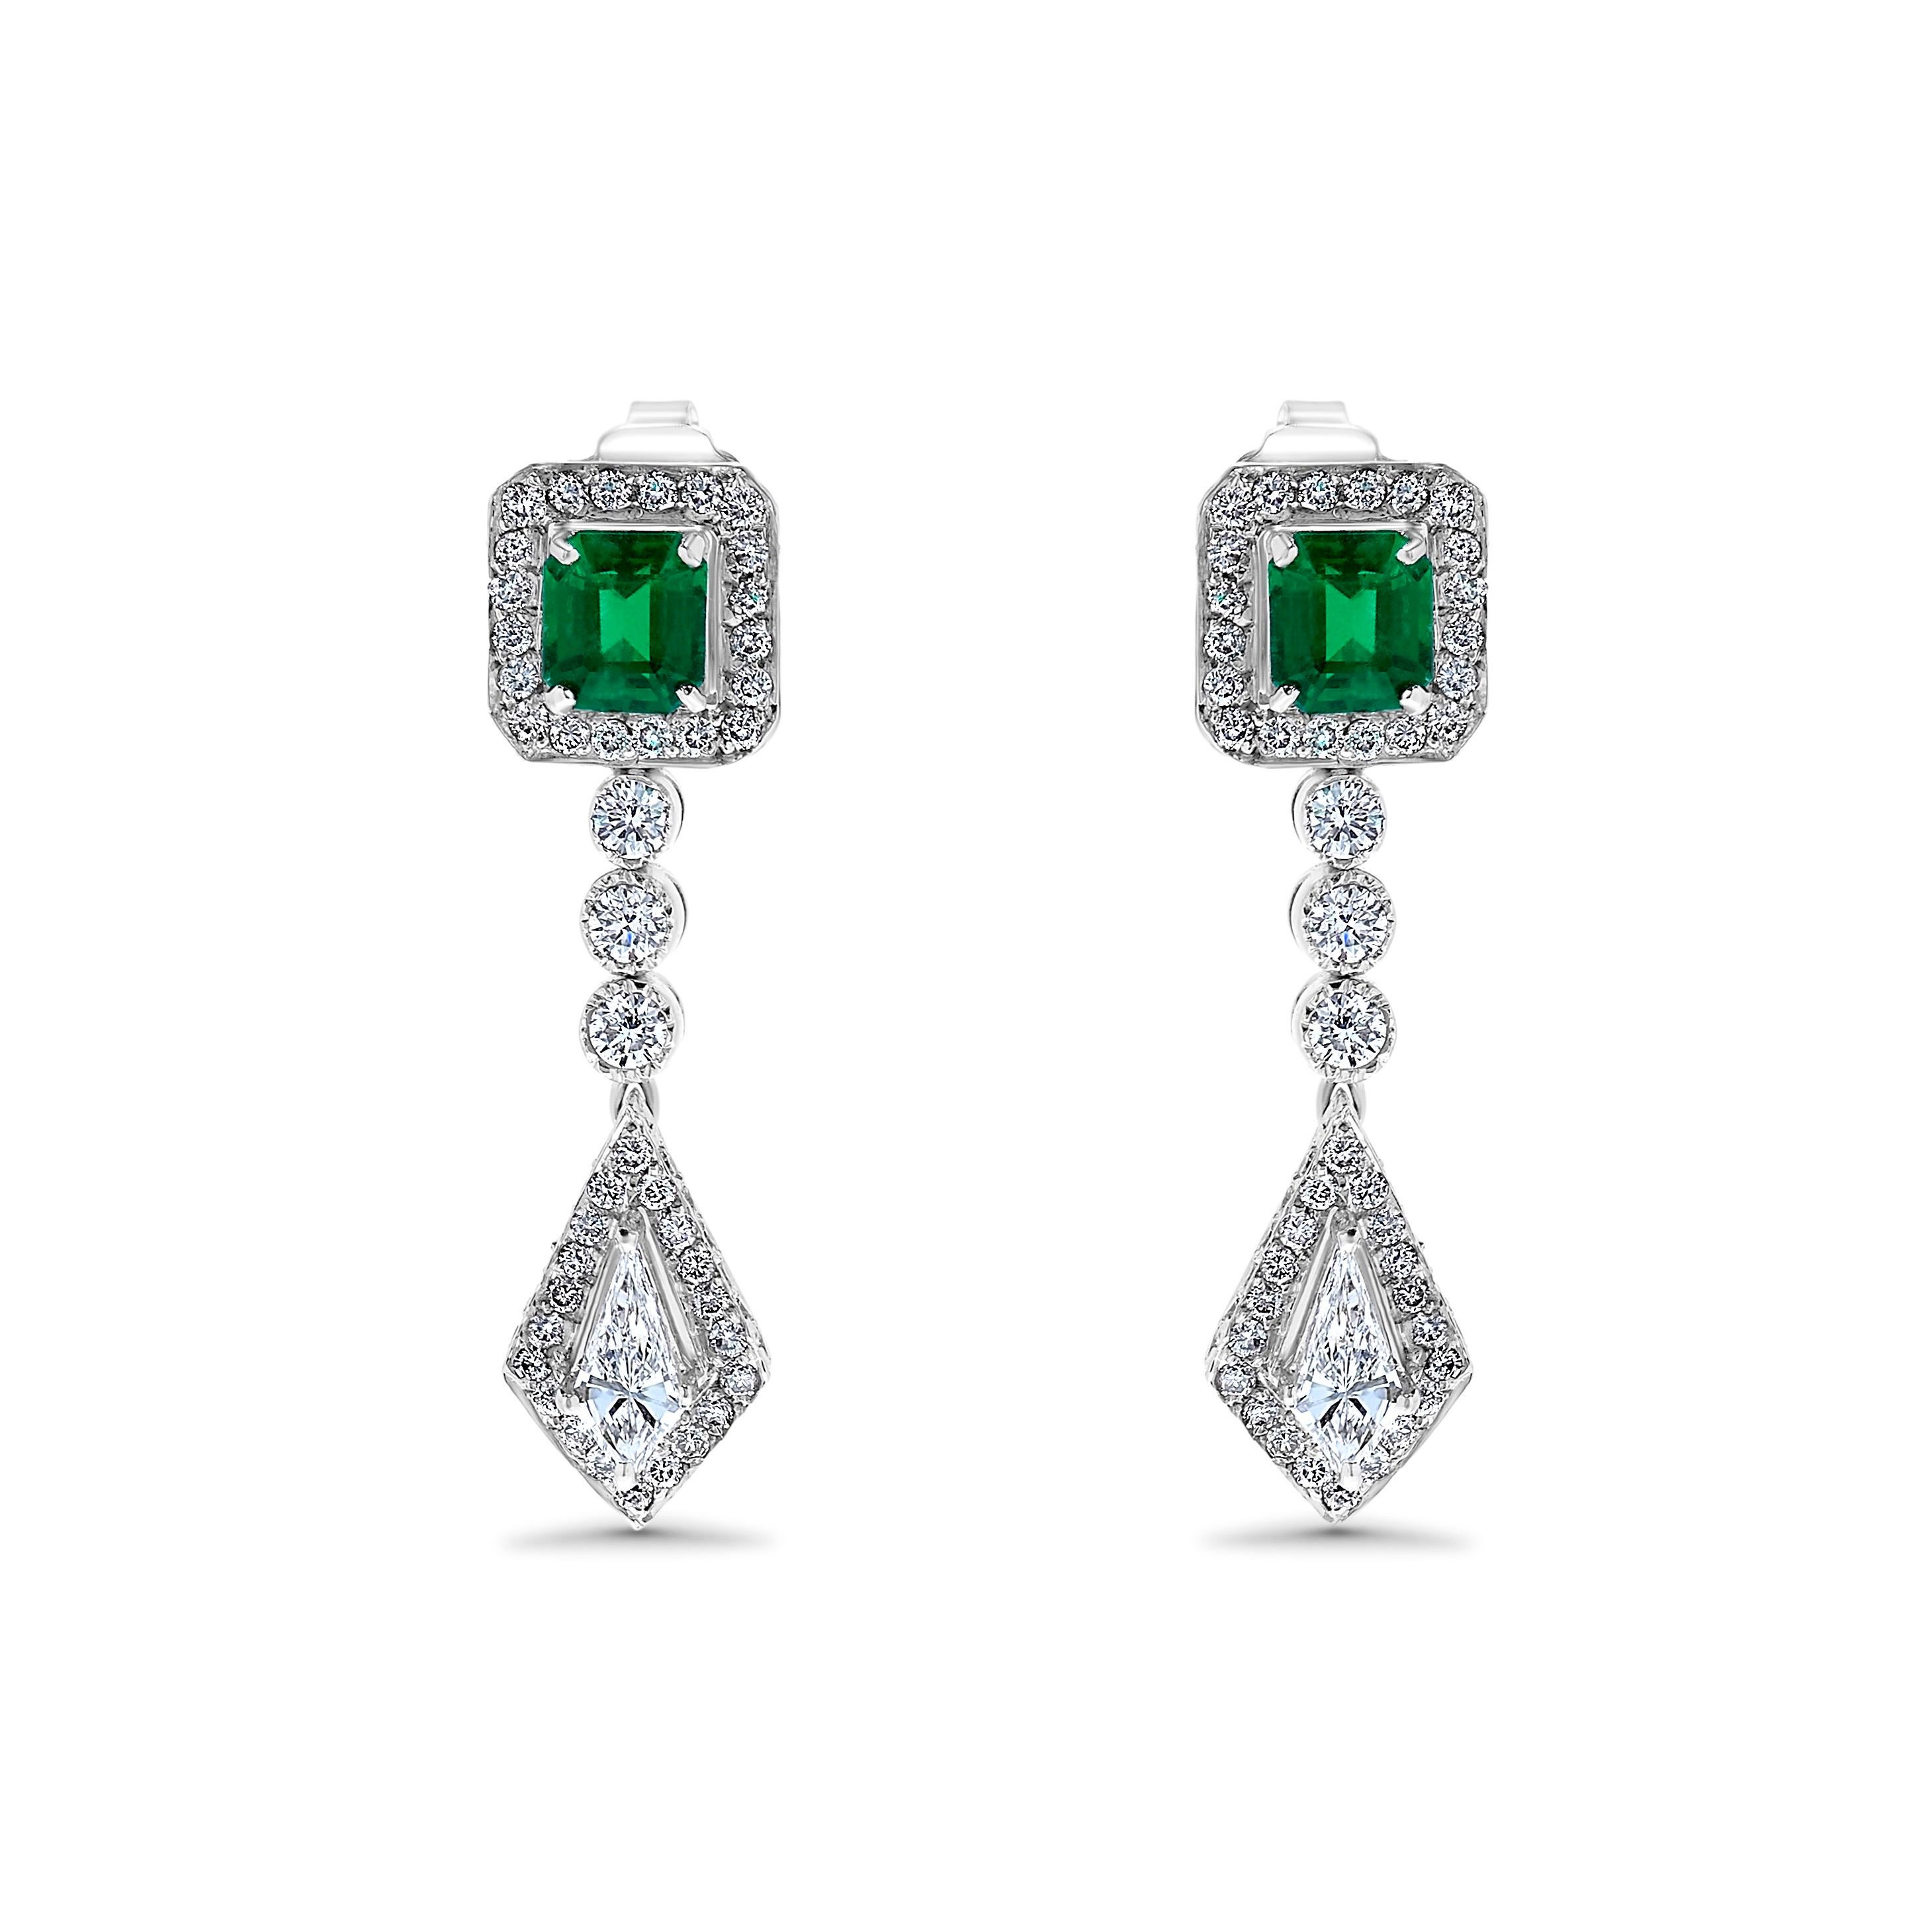 From the Emilio Jewelry Vault in New York,

Emilio Jewelry is a dealer, wholesaler now offering our exclusive pieces direct to the consumer. Please inquire for more details
Emeralds super fine Colombian excellent transparency  1.79 cts
D 2.59 cts